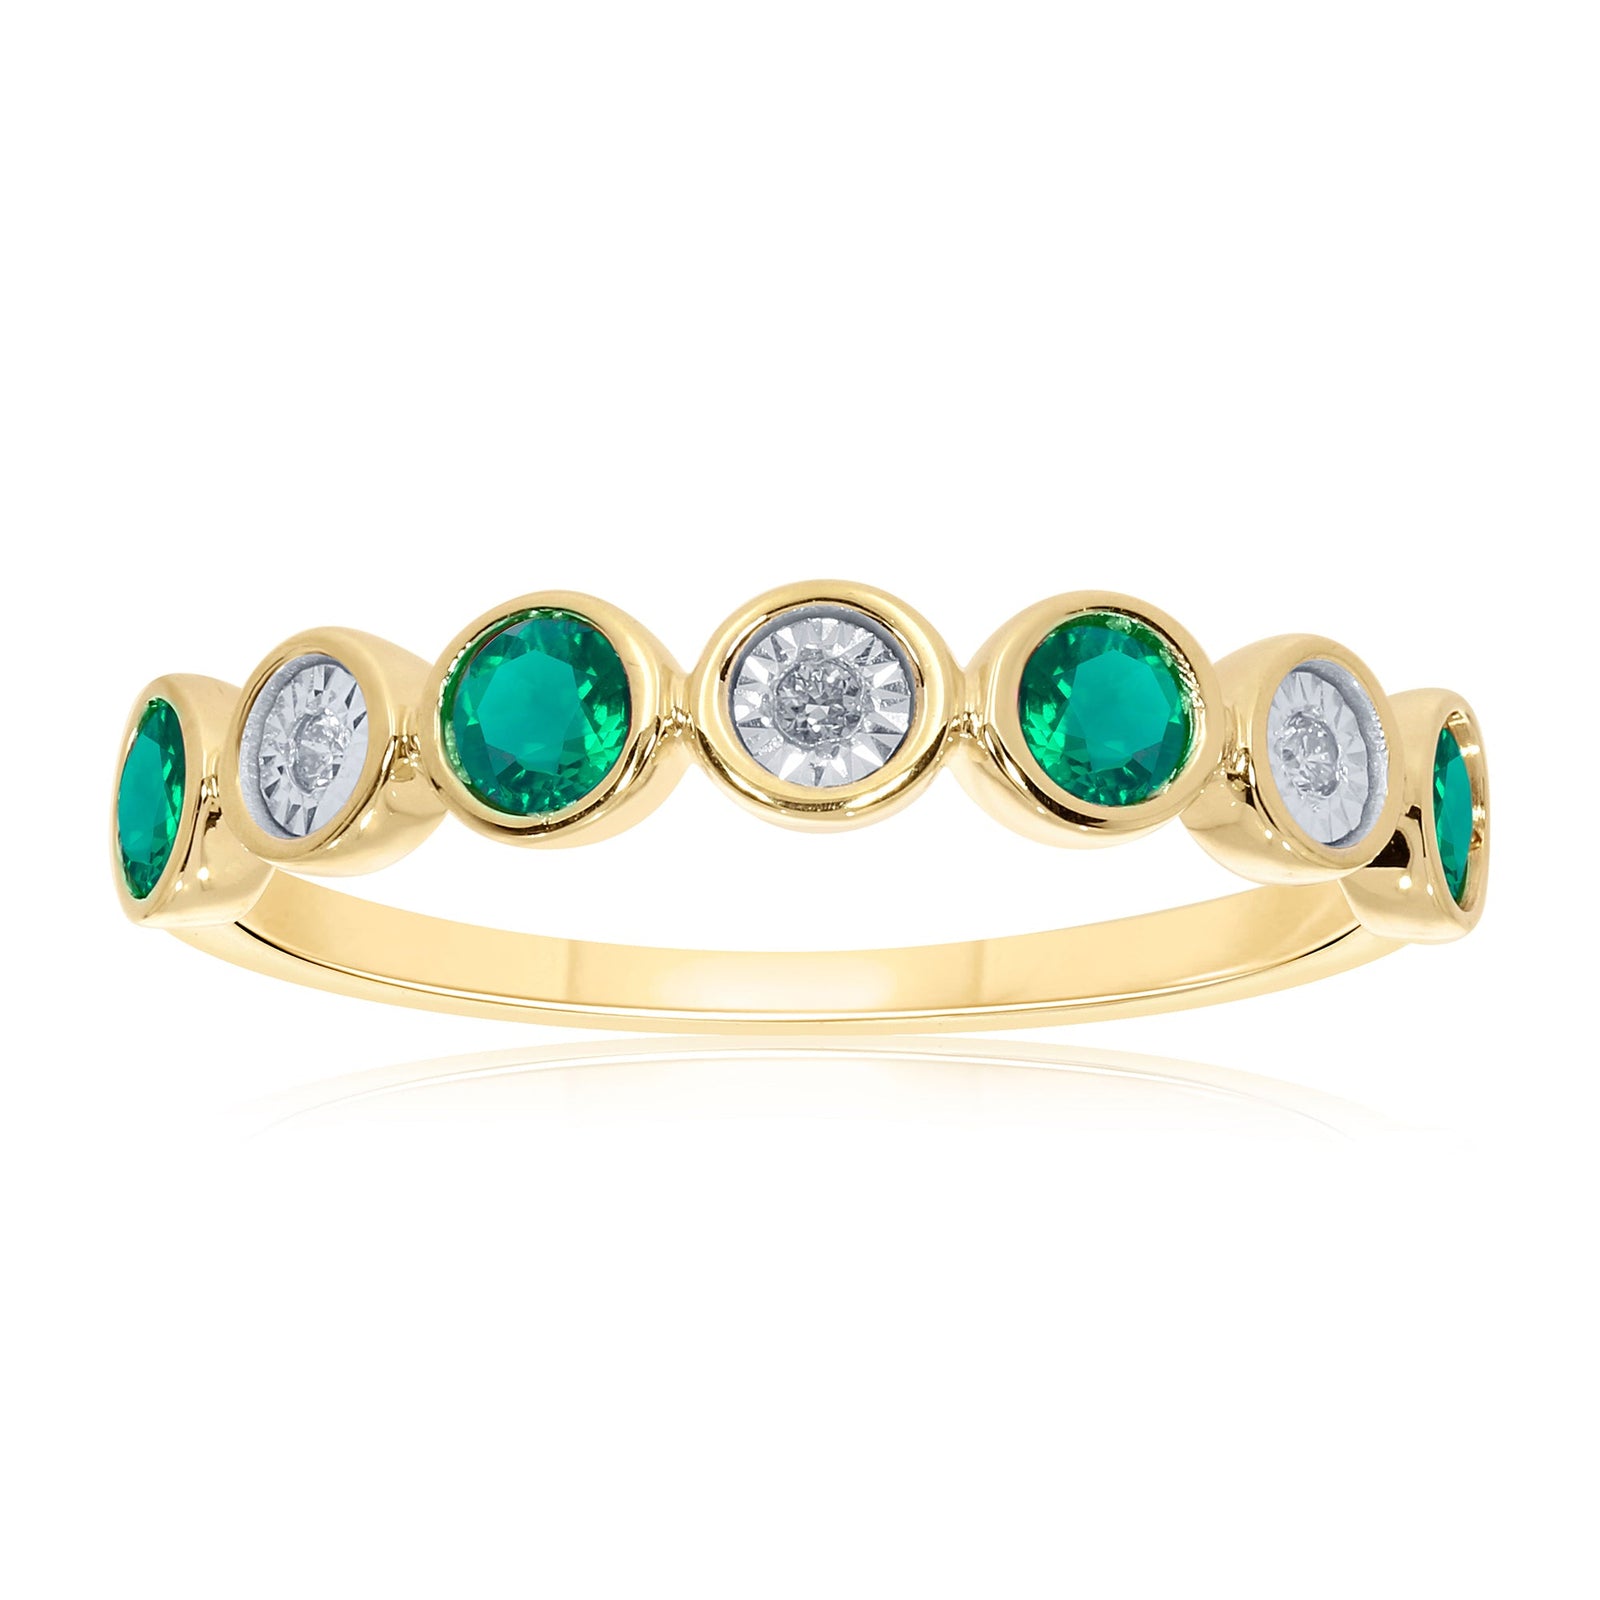 9ct gold 3mm round emerald & miracle plate diamond half et ring 0.03ct